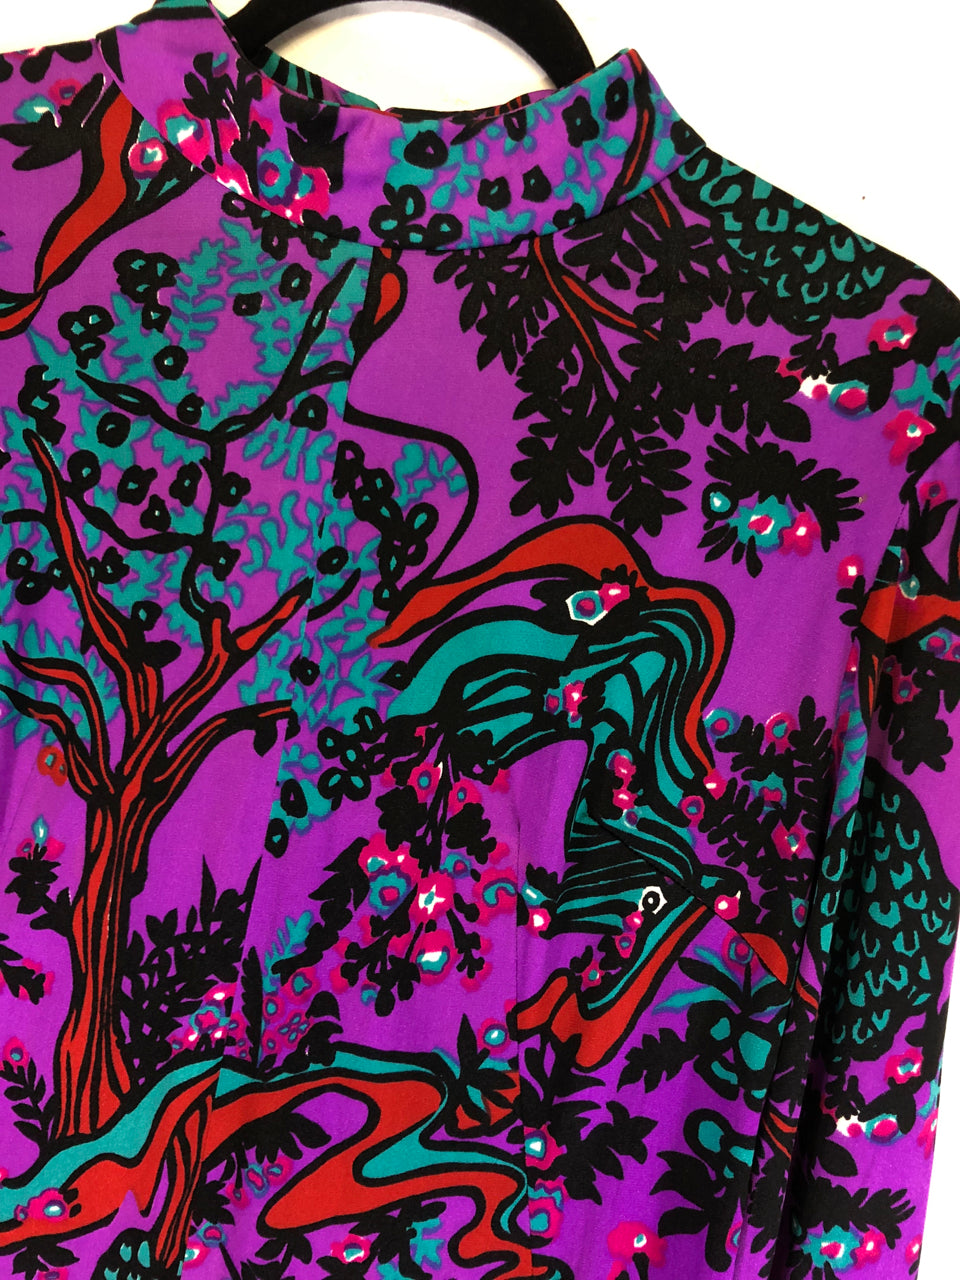 70s Psychedelic Forest Dress